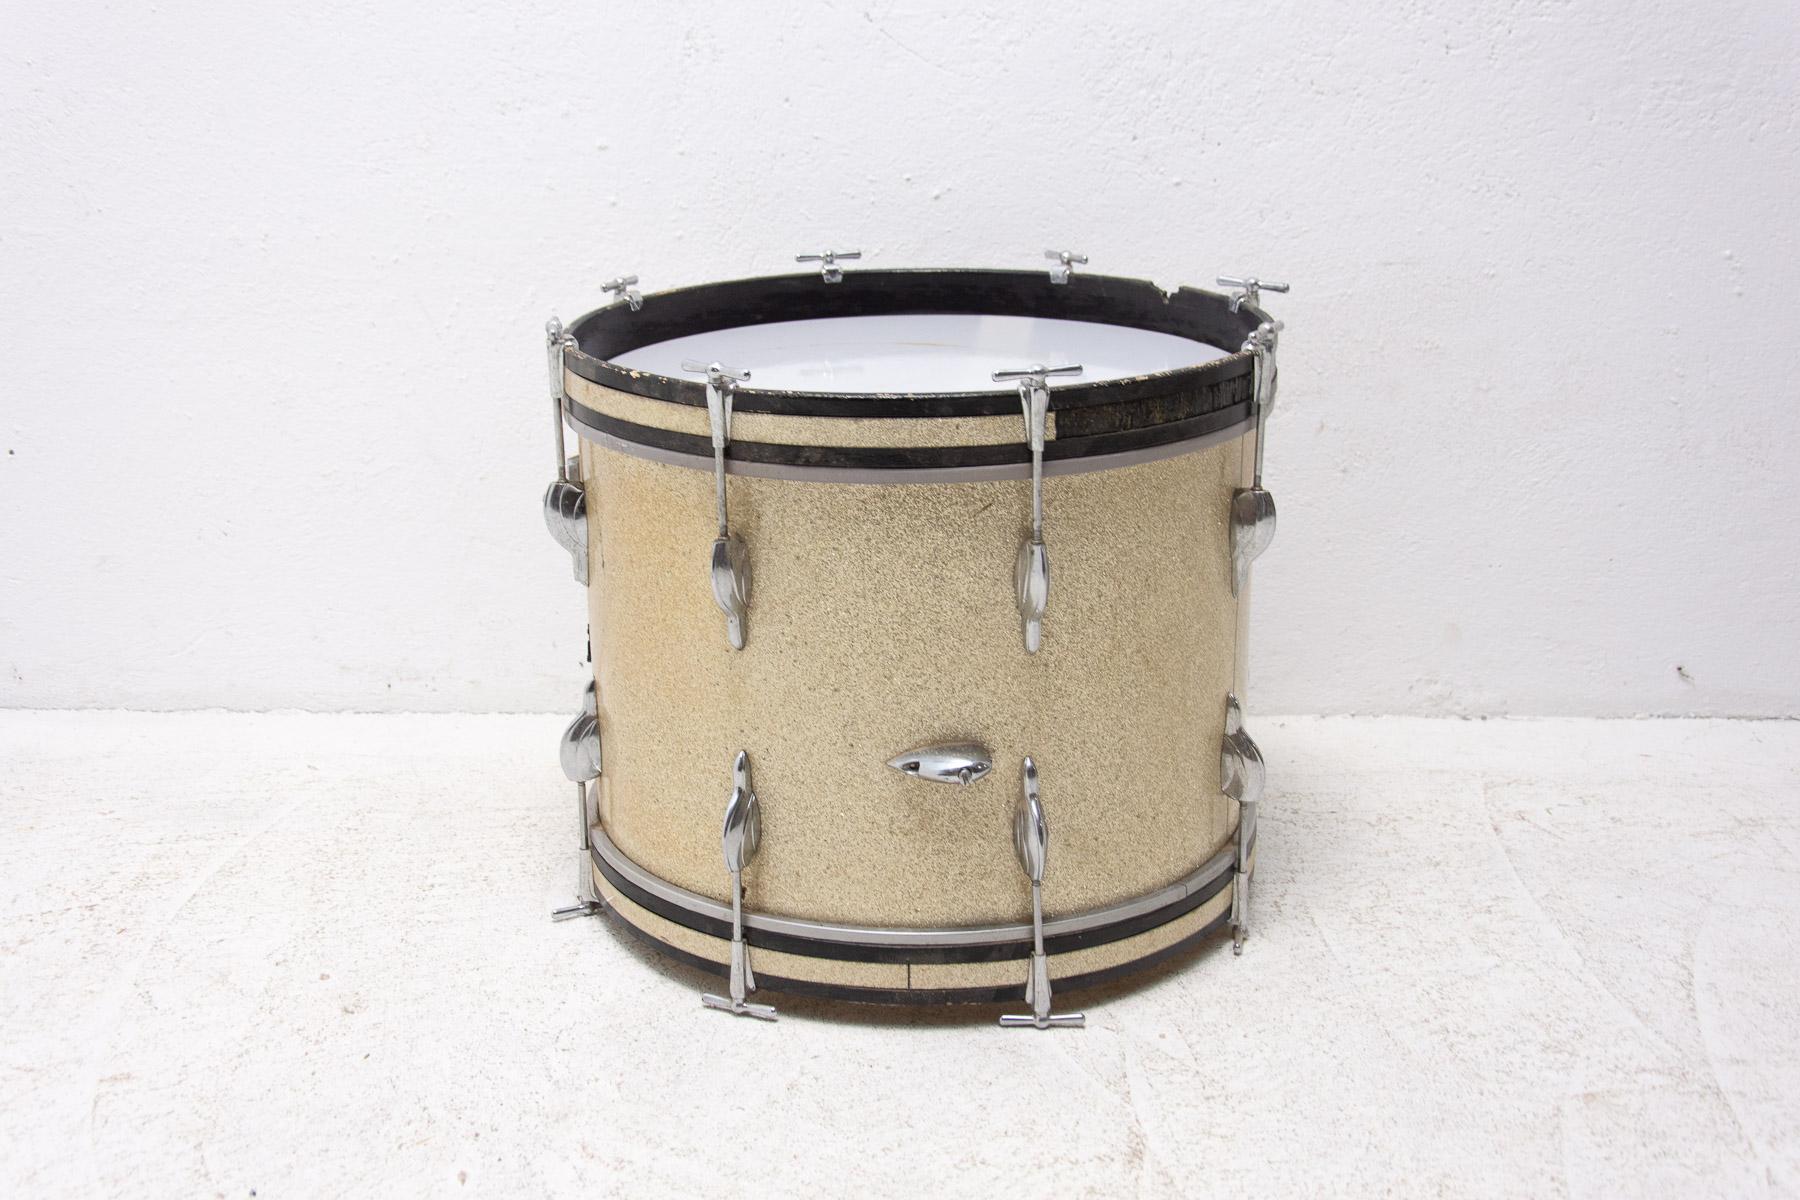 Vintage music drum, made in the 70’s in Czechoslovakia. It was originally originally part of a drum kit. In good Vintage condition.

Measures: Height: 46 cm

Width: 53 cm

Depth: 53 cm.